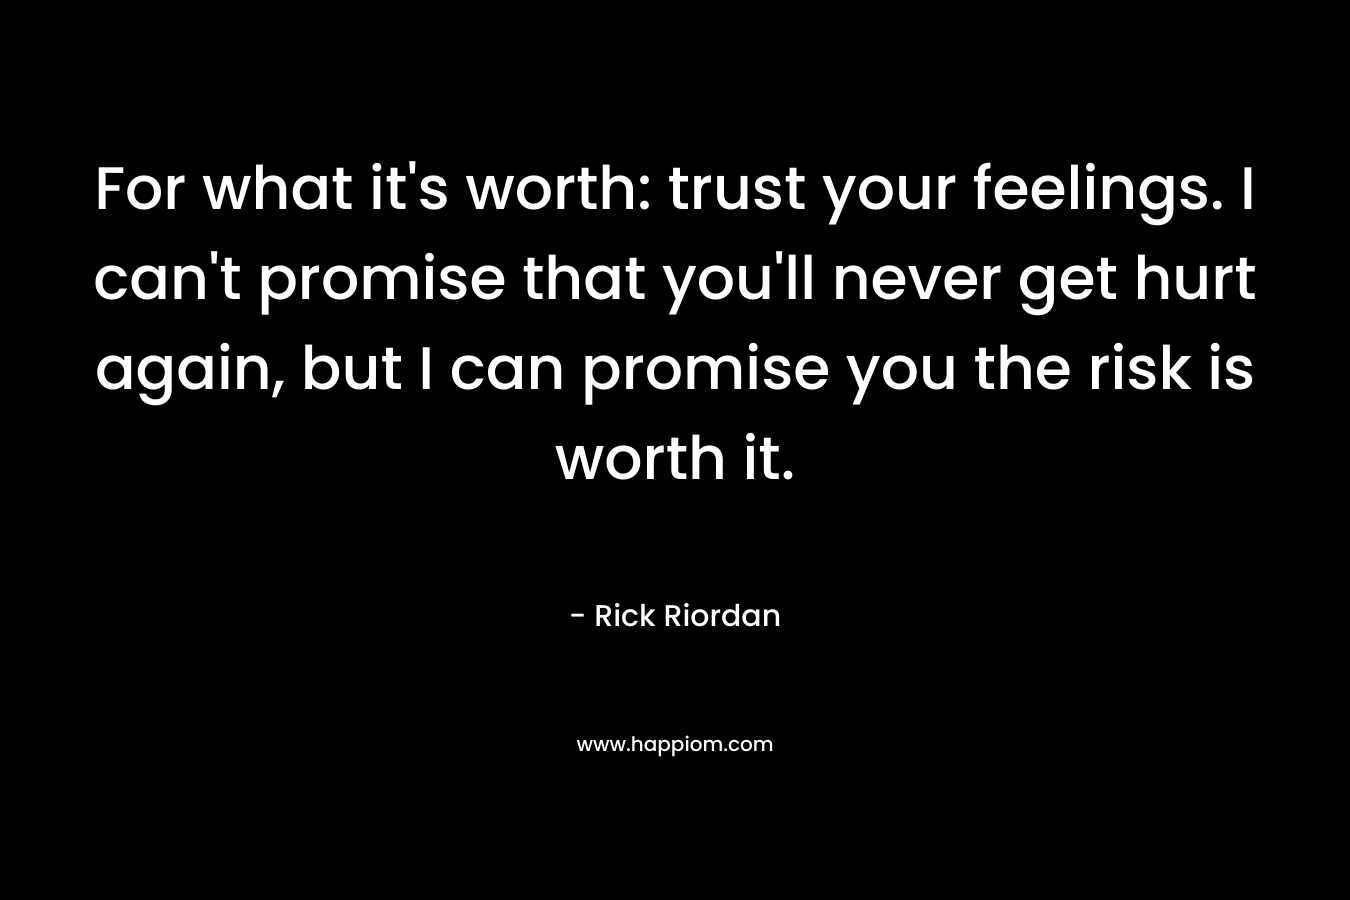 For what it's worth: trust your feelings. I can't promise that you'll never get hurt again, but I can promise you the risk is worth it.